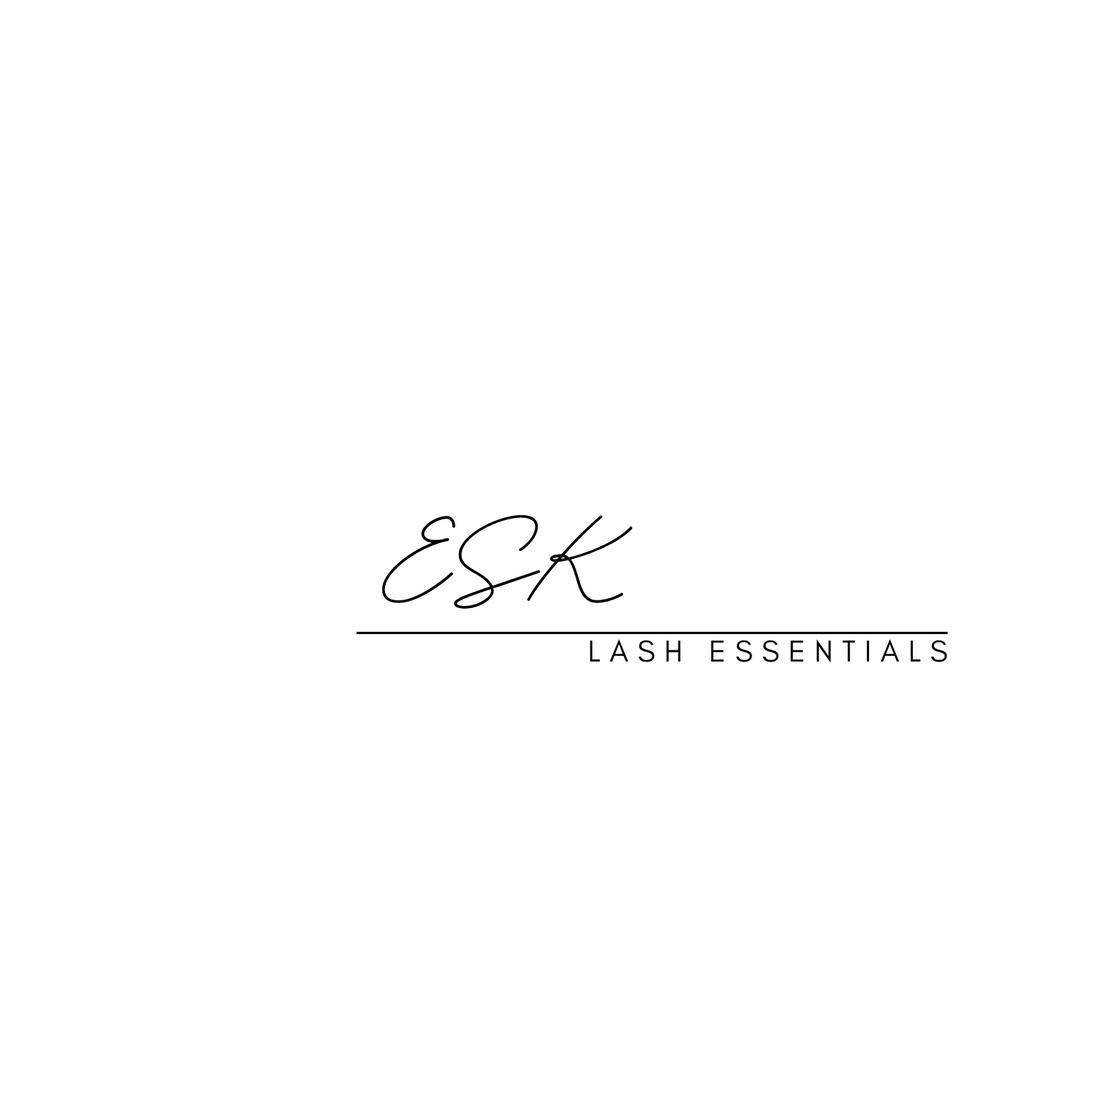 Achieve Natural Beauty with The Classic (C Curl .15mm) Lash Extensions from ESK: Your Go-To Online Lash Shop!